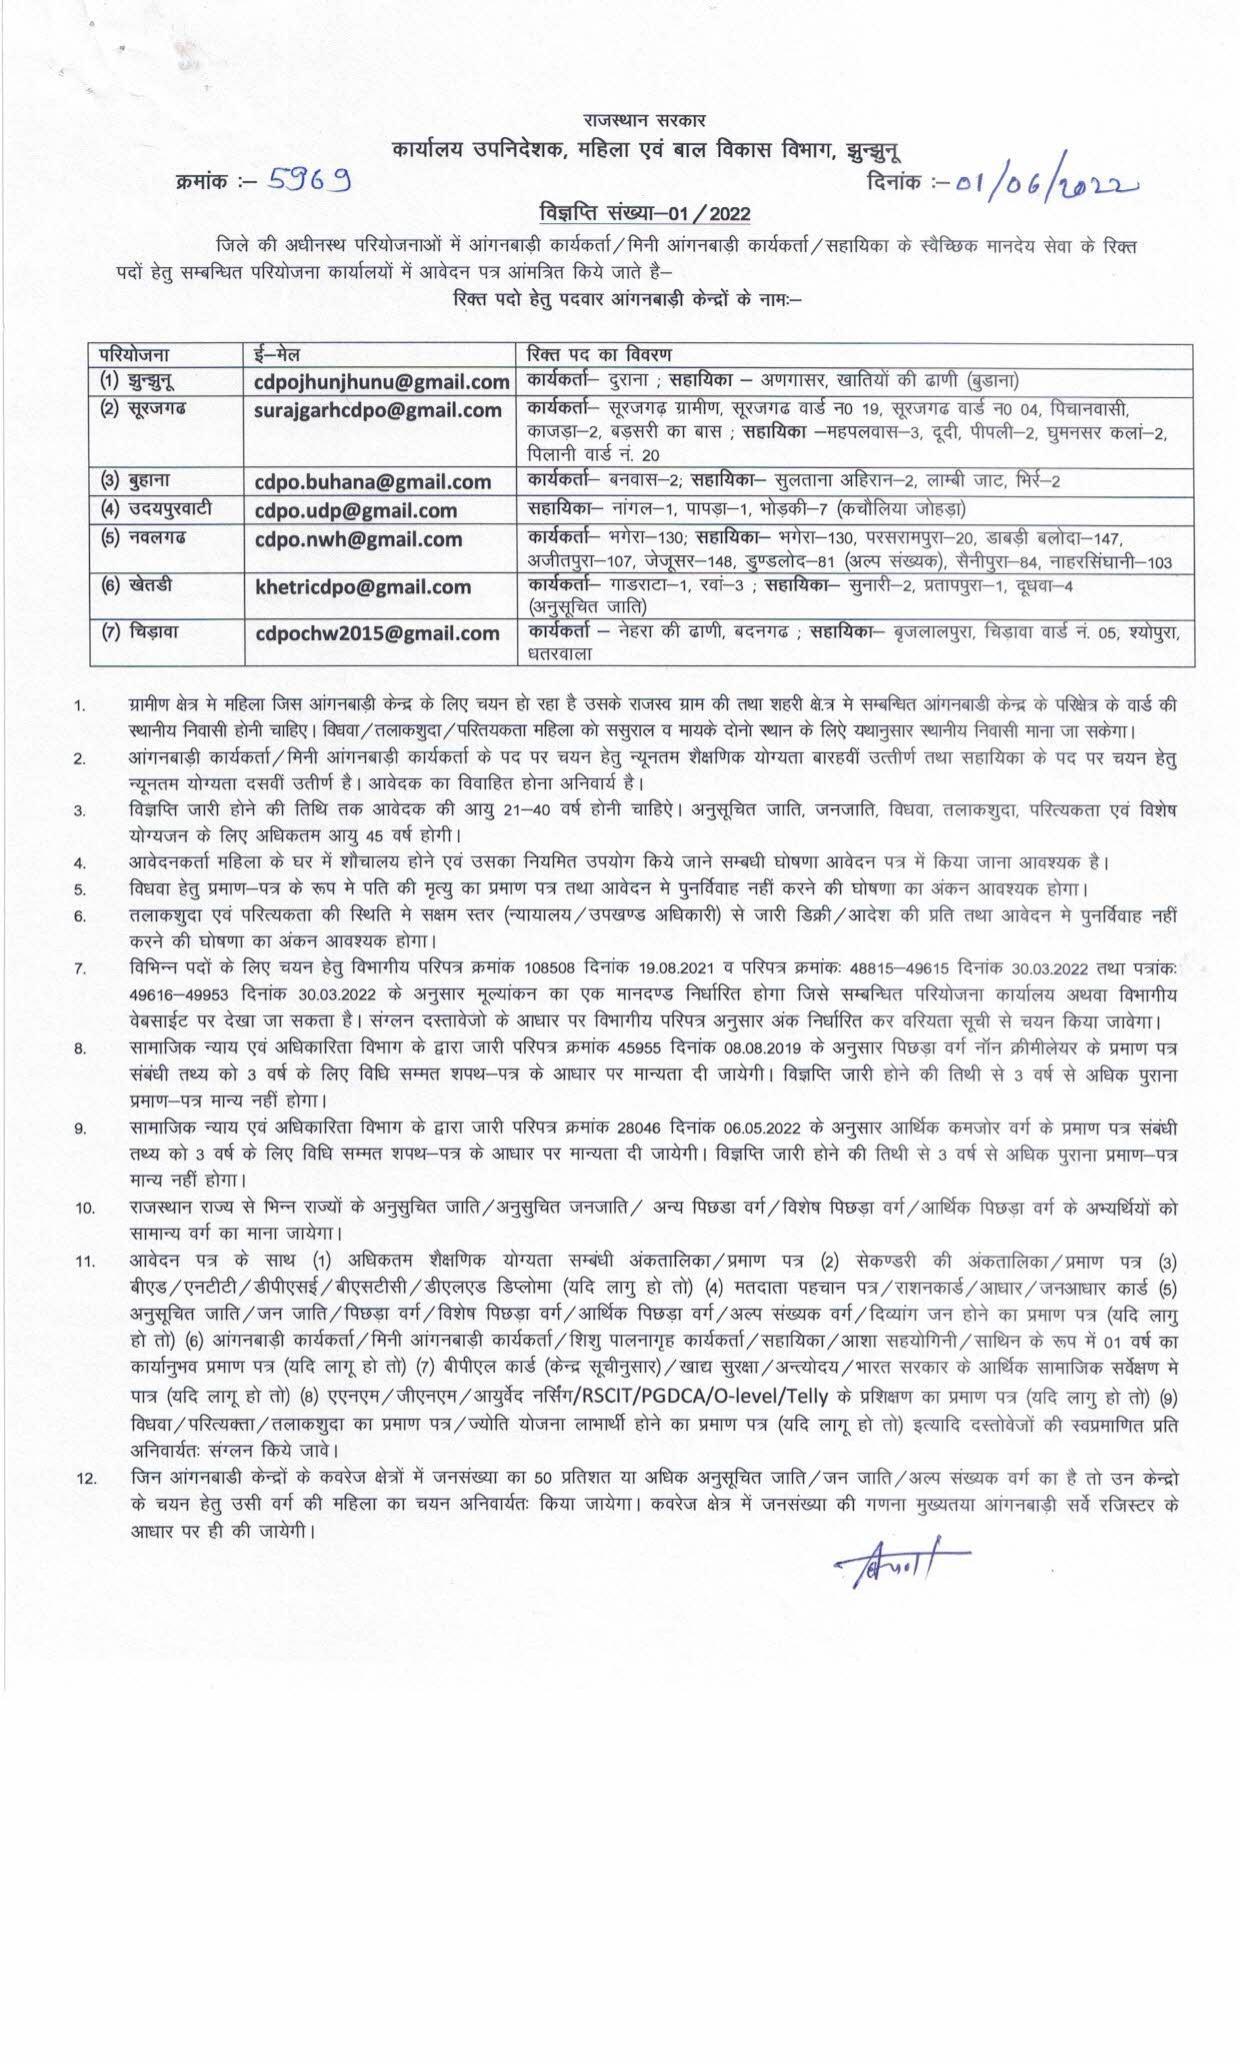 WCD Rajasthan Invites Application for 1033 Anganwadi Worker and Anganwadi Assistant Recruitment 2022 - Page 2